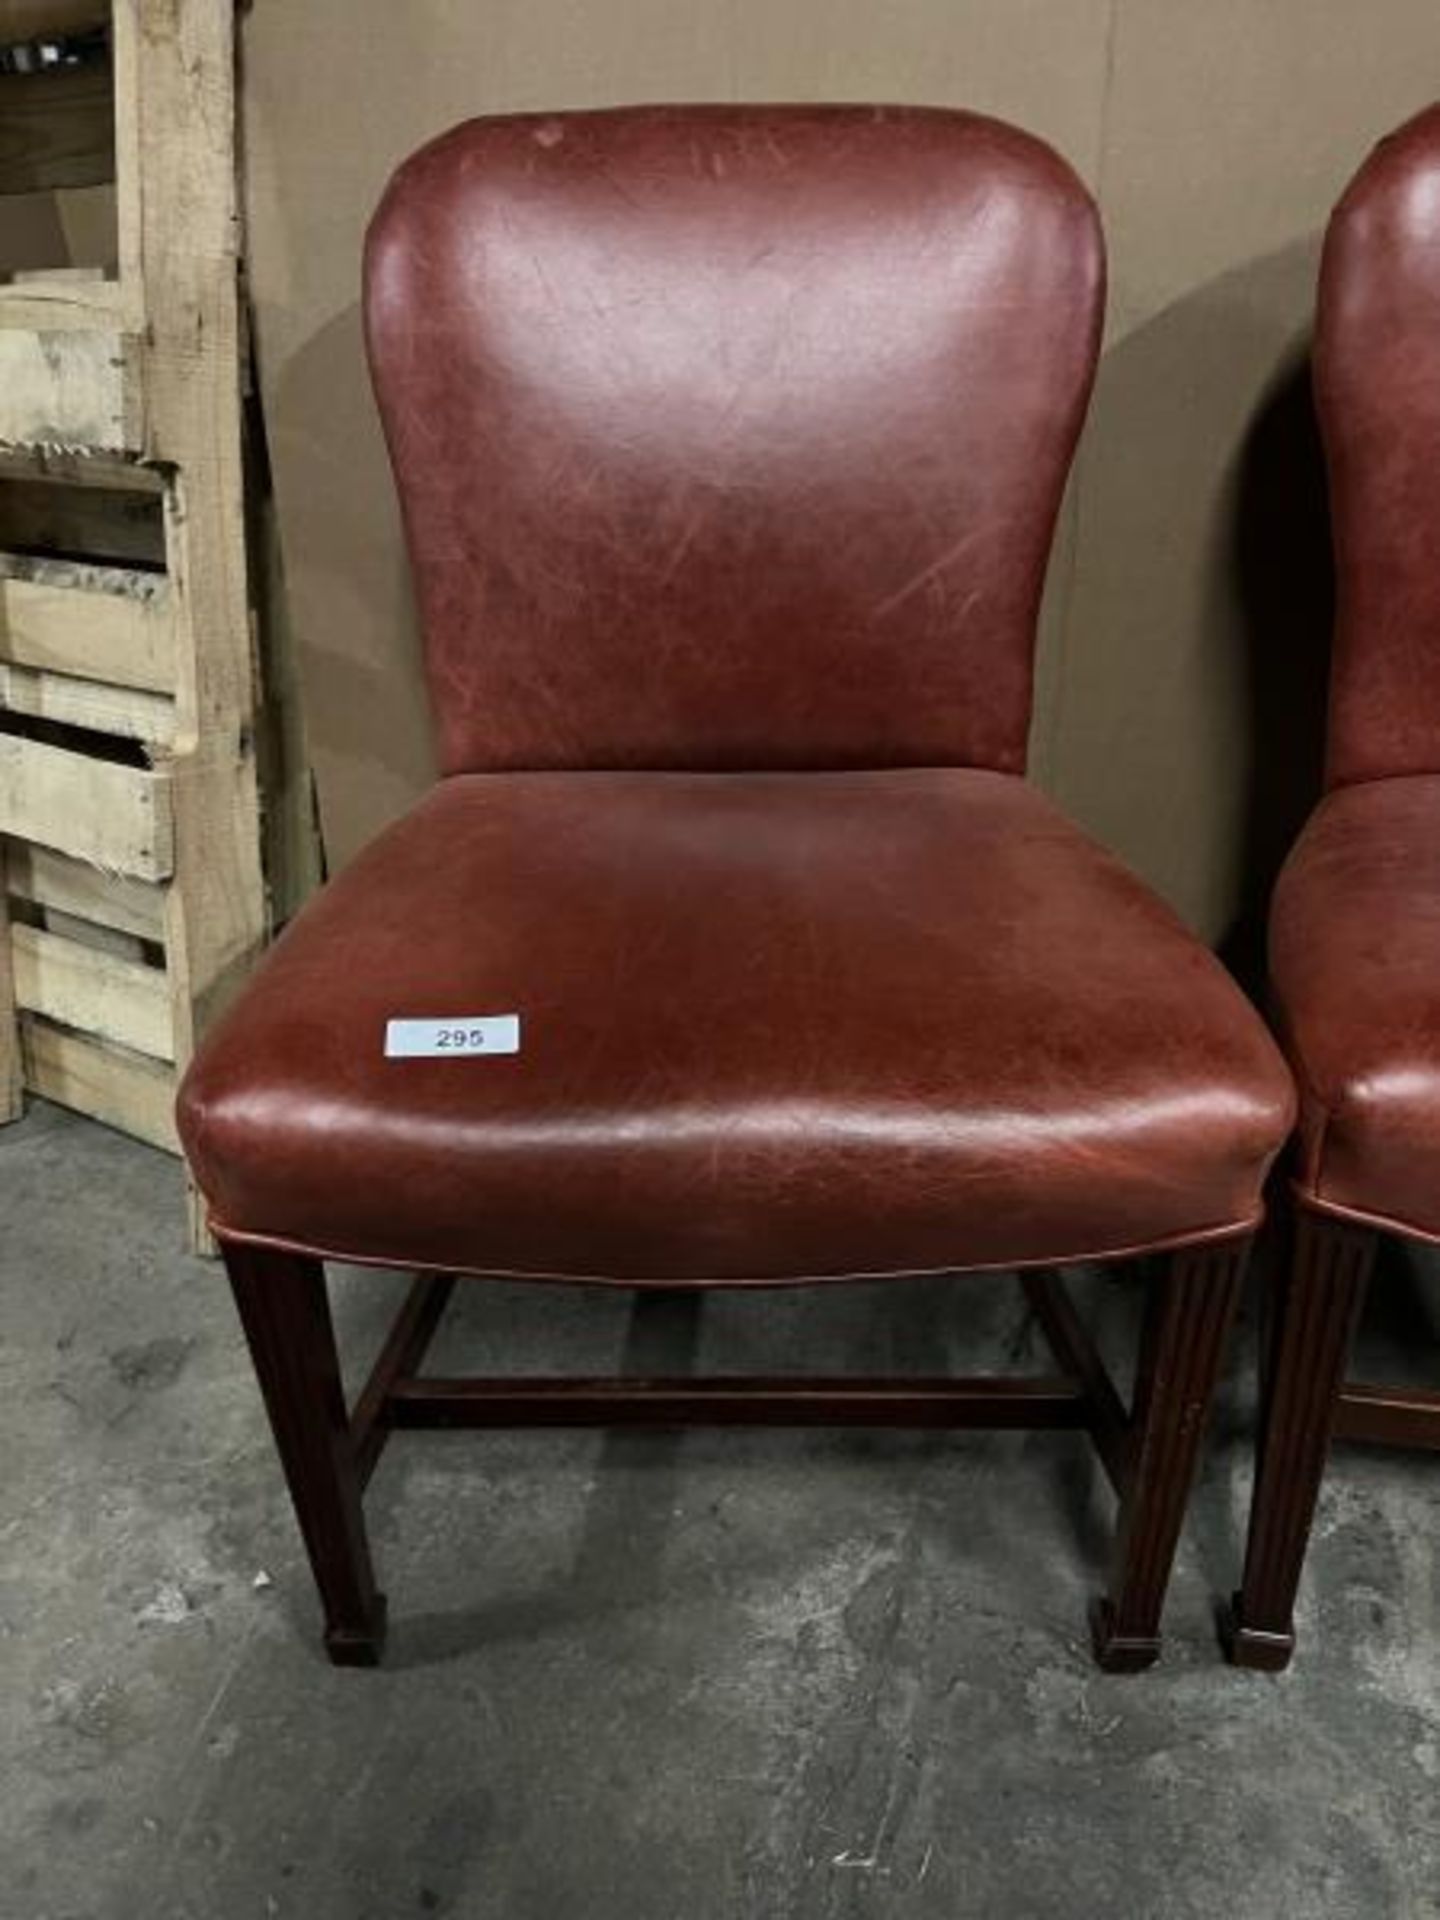 Pair of Red Vinyl Chairs; Located in Mill Building - Image 3 of 20